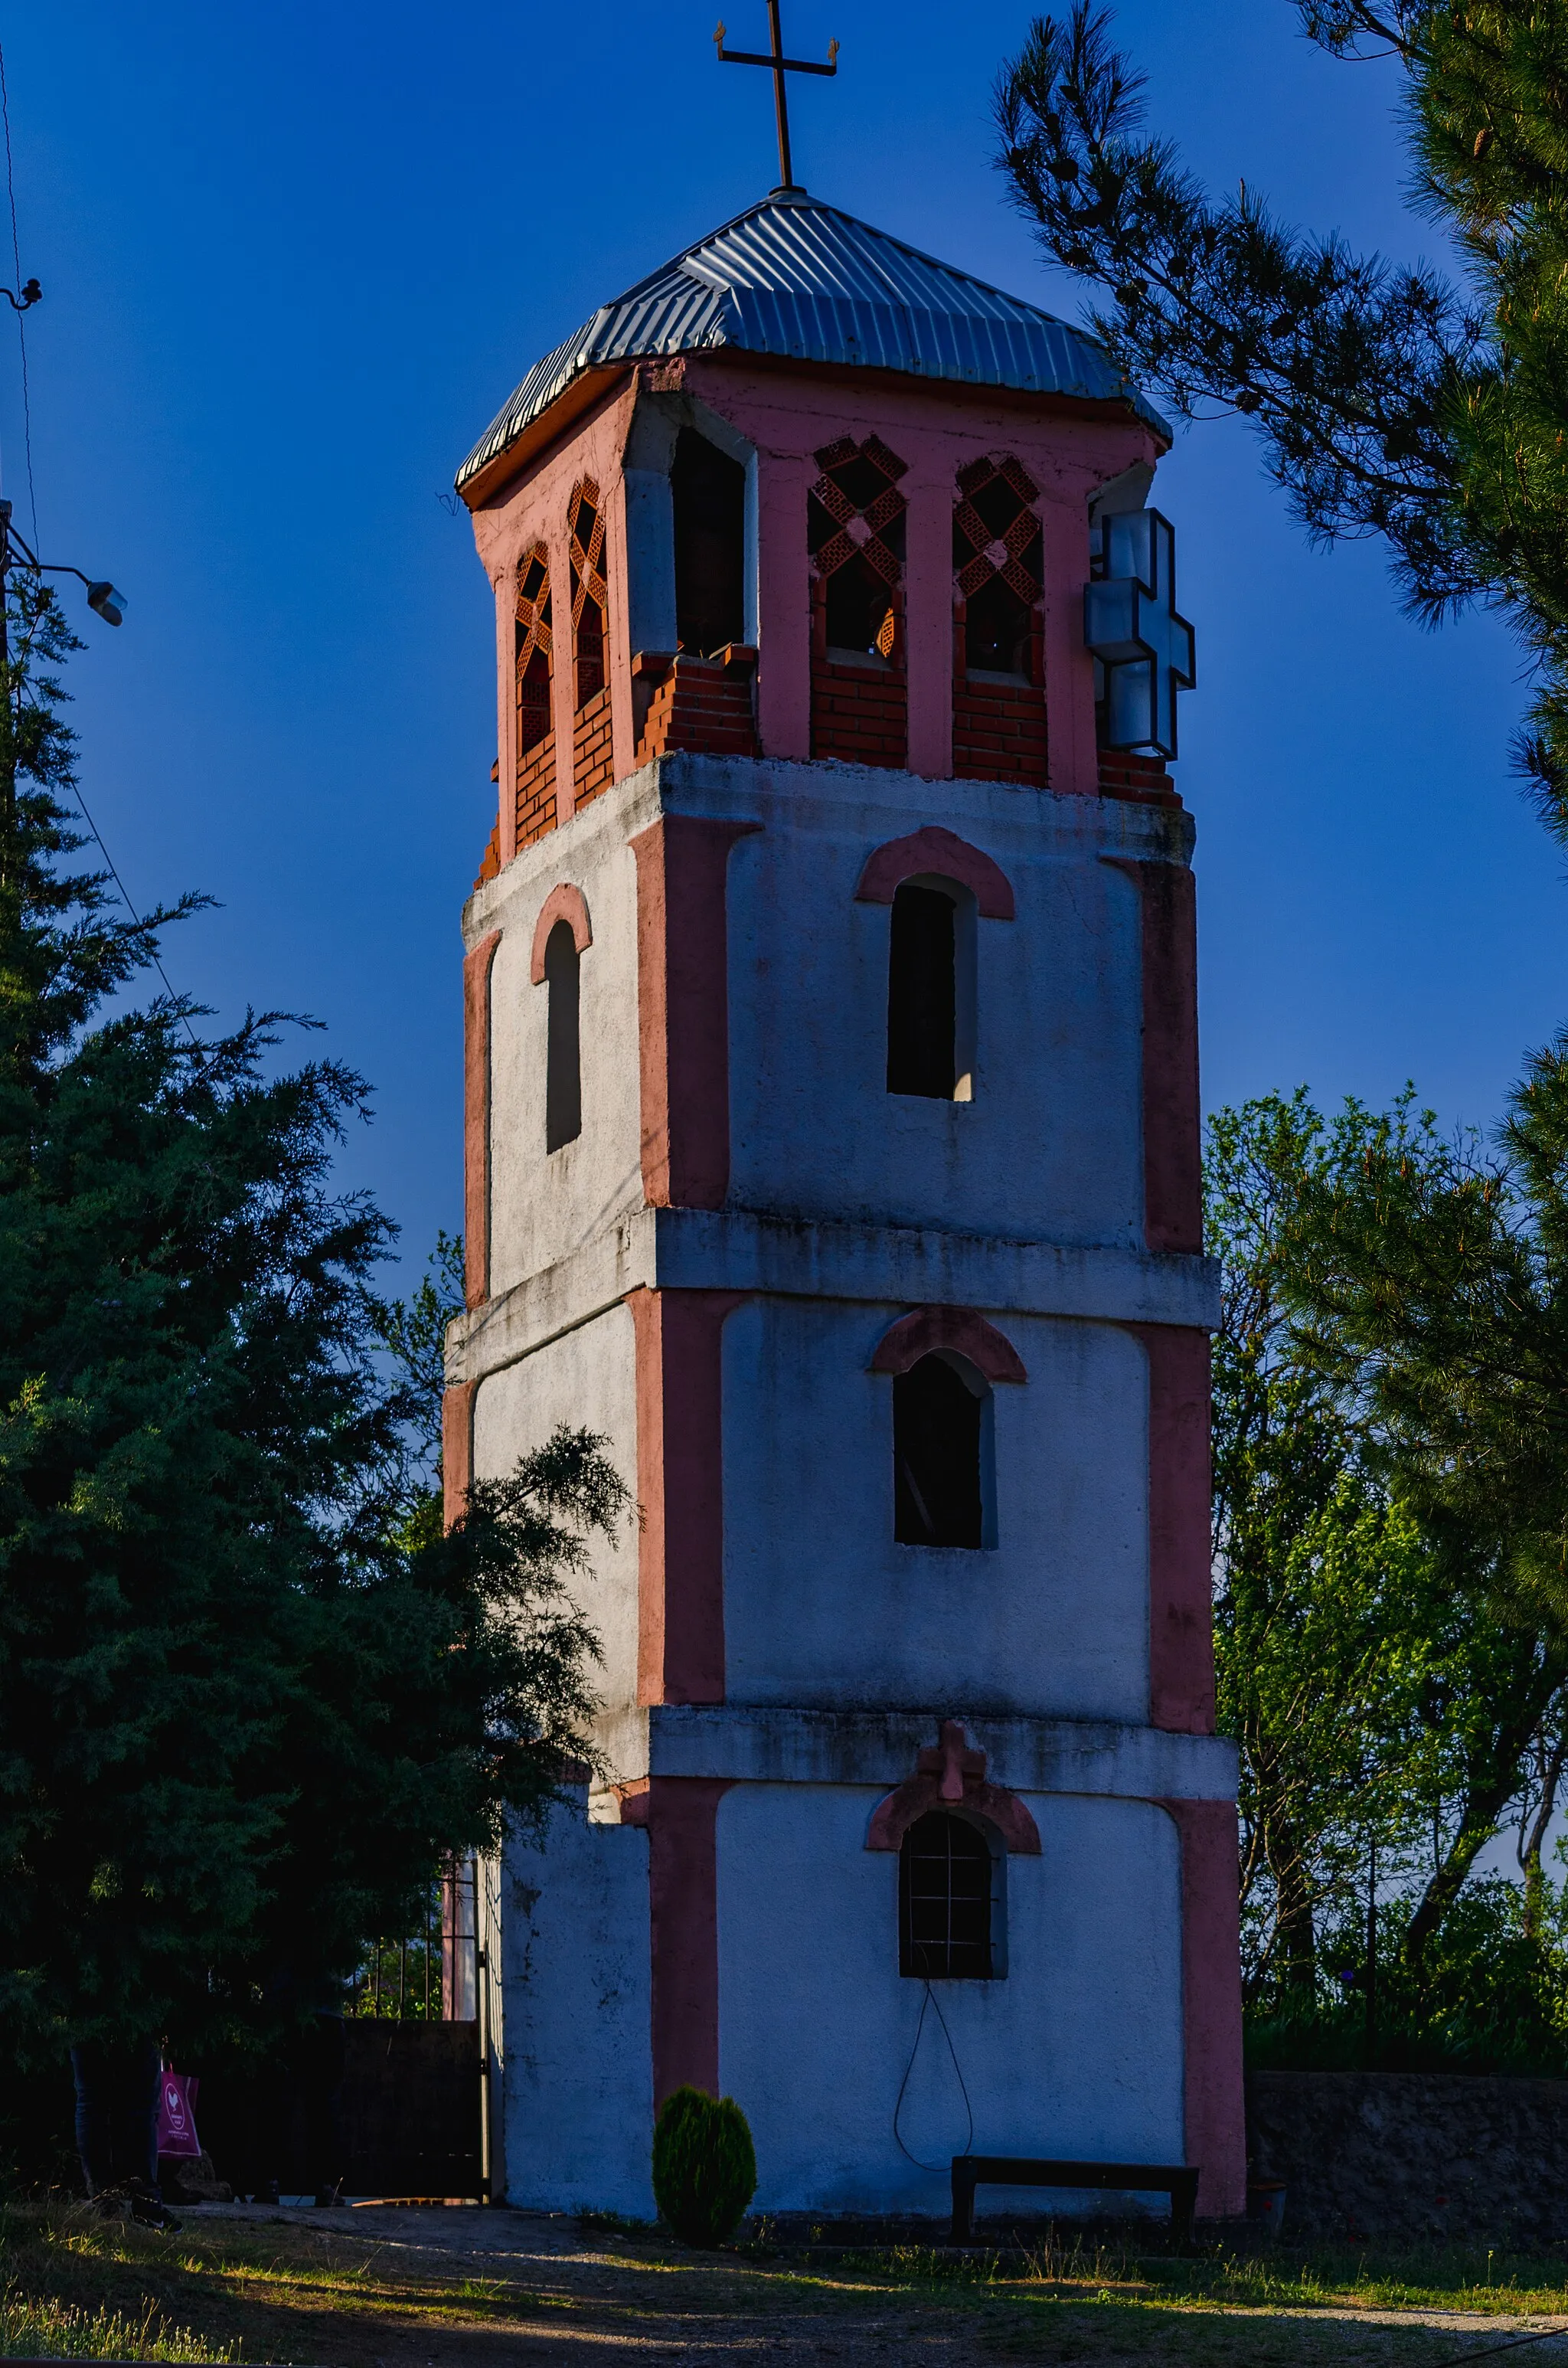 Photo showing: The bell tower of the St. Demetrius Church in the village of Smokvica, Macedonia